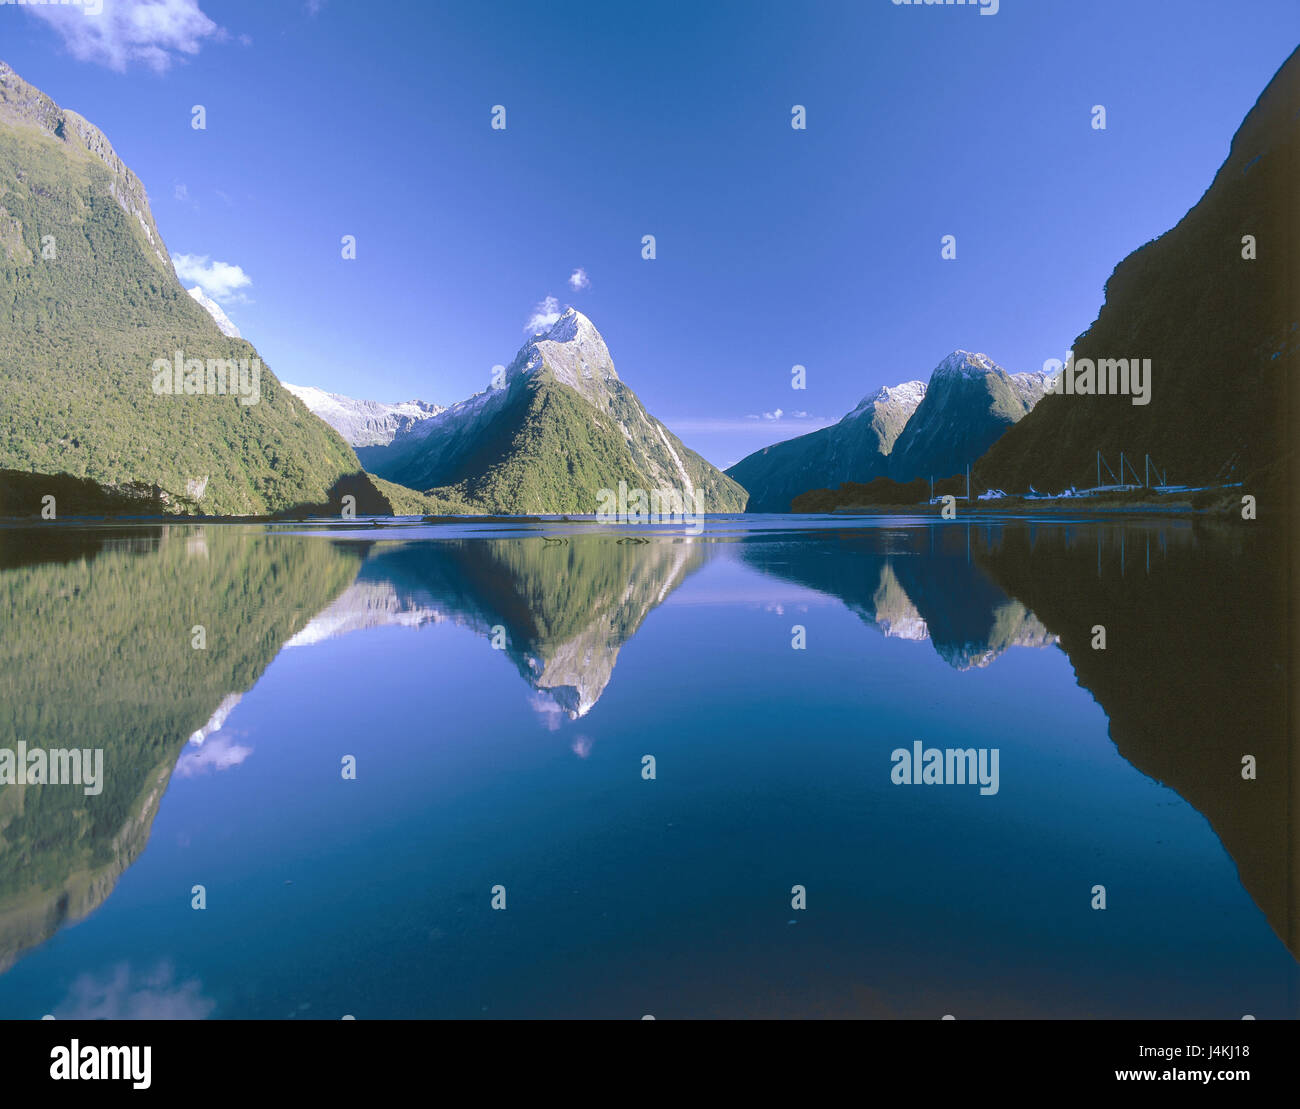 New Zealand, south island, fjord country national park, Mitre Peak New Zealand, mountain landscape, mountain, mountains, coast, fjord, water surface, mirroring, destination, place of interest, nature, rest, silence, Idyll Stock Photo